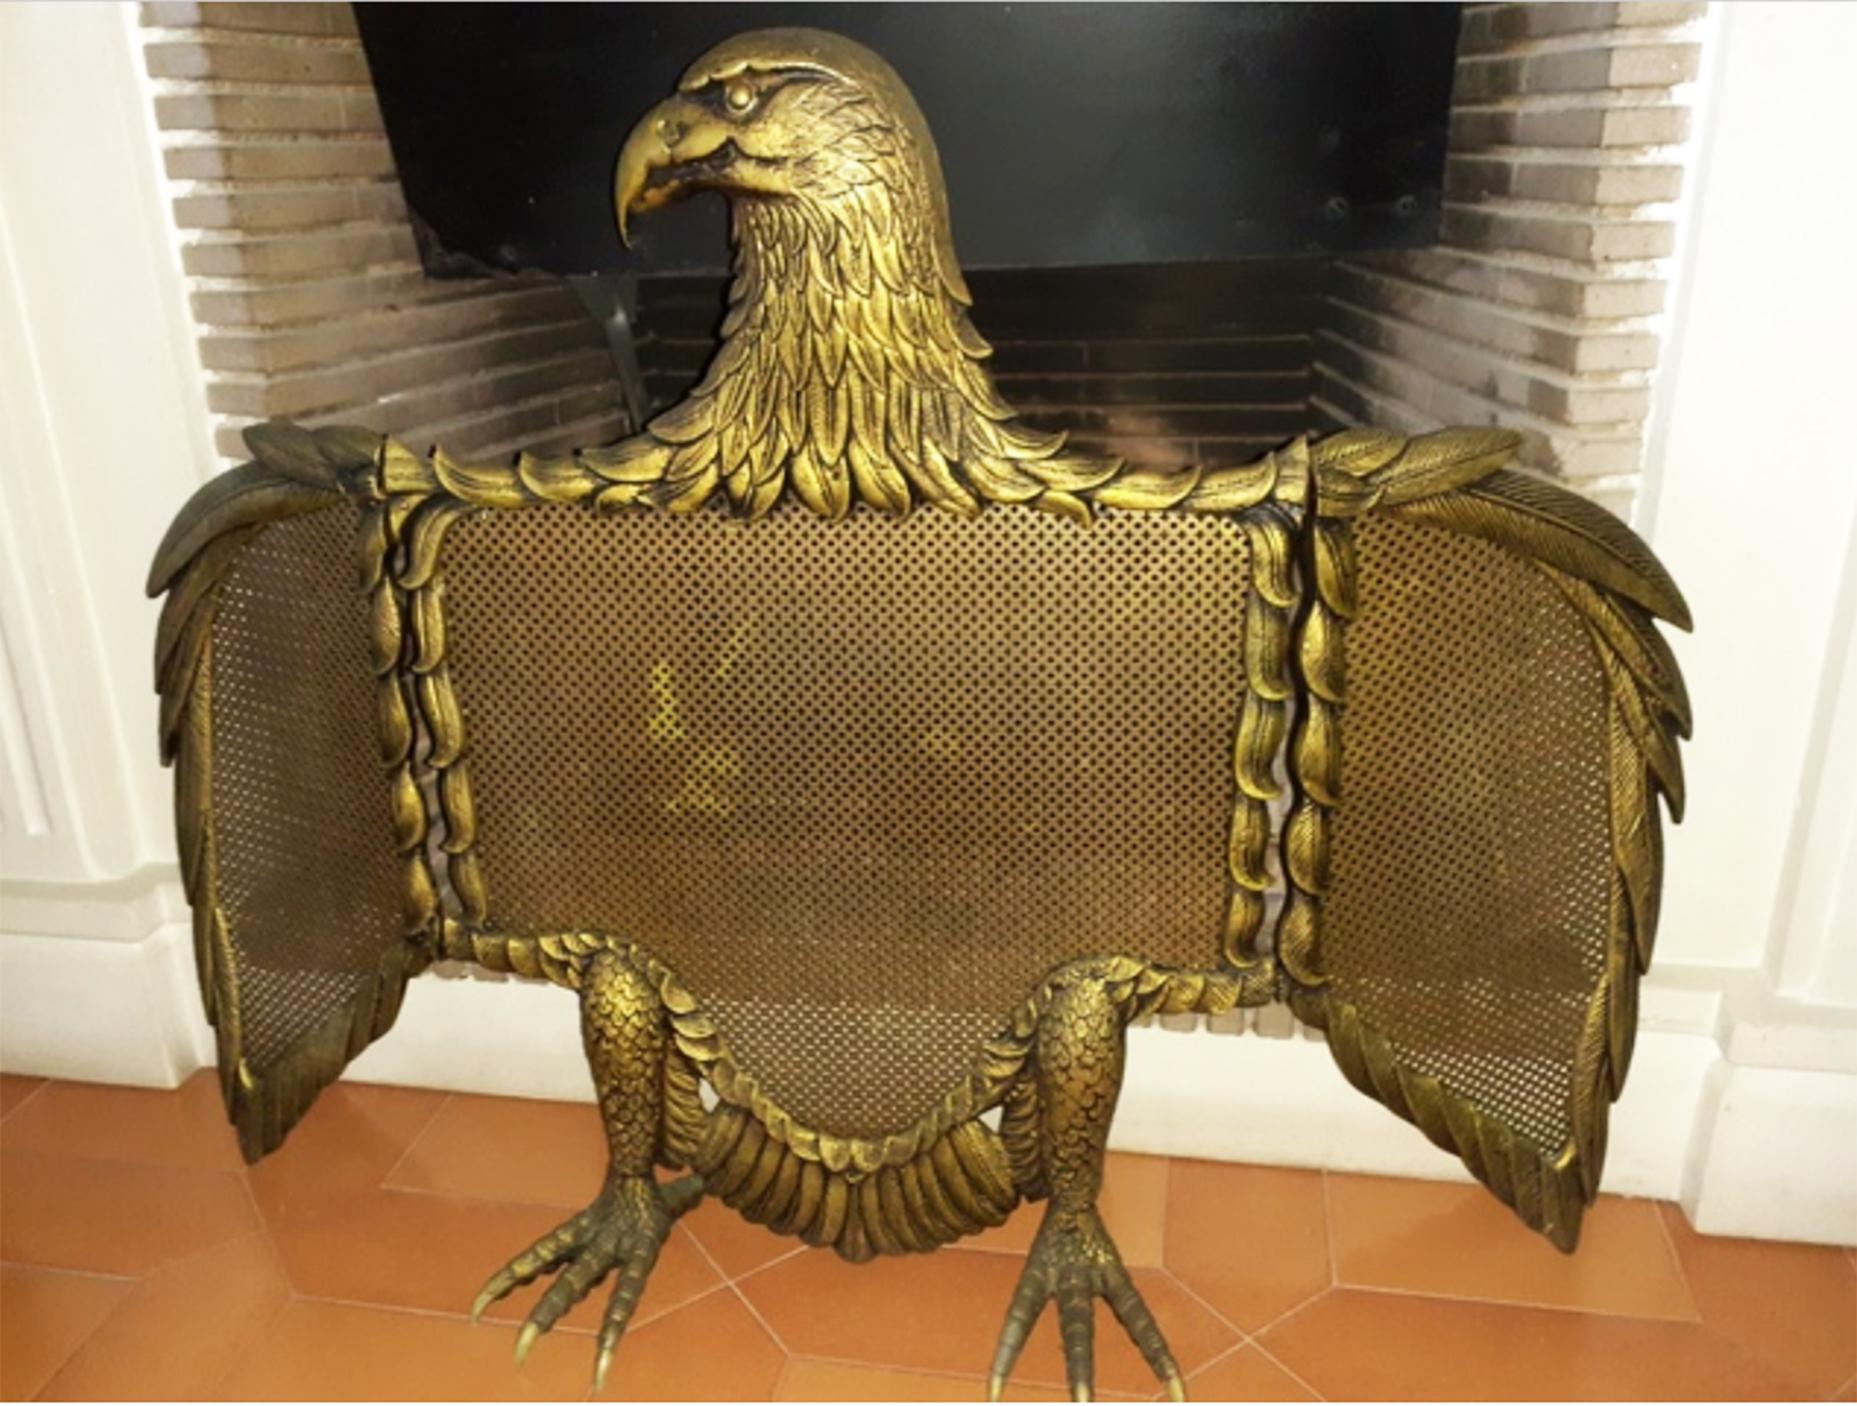 Three-panel fire screen bronze or brass eagle-shaped sparks

Save bronze or brass eagle-shaped sparks with open wings that fold.

This exceptional fire screen in the shape of an eagle, is very solid and strong and opens its majestic wings and is